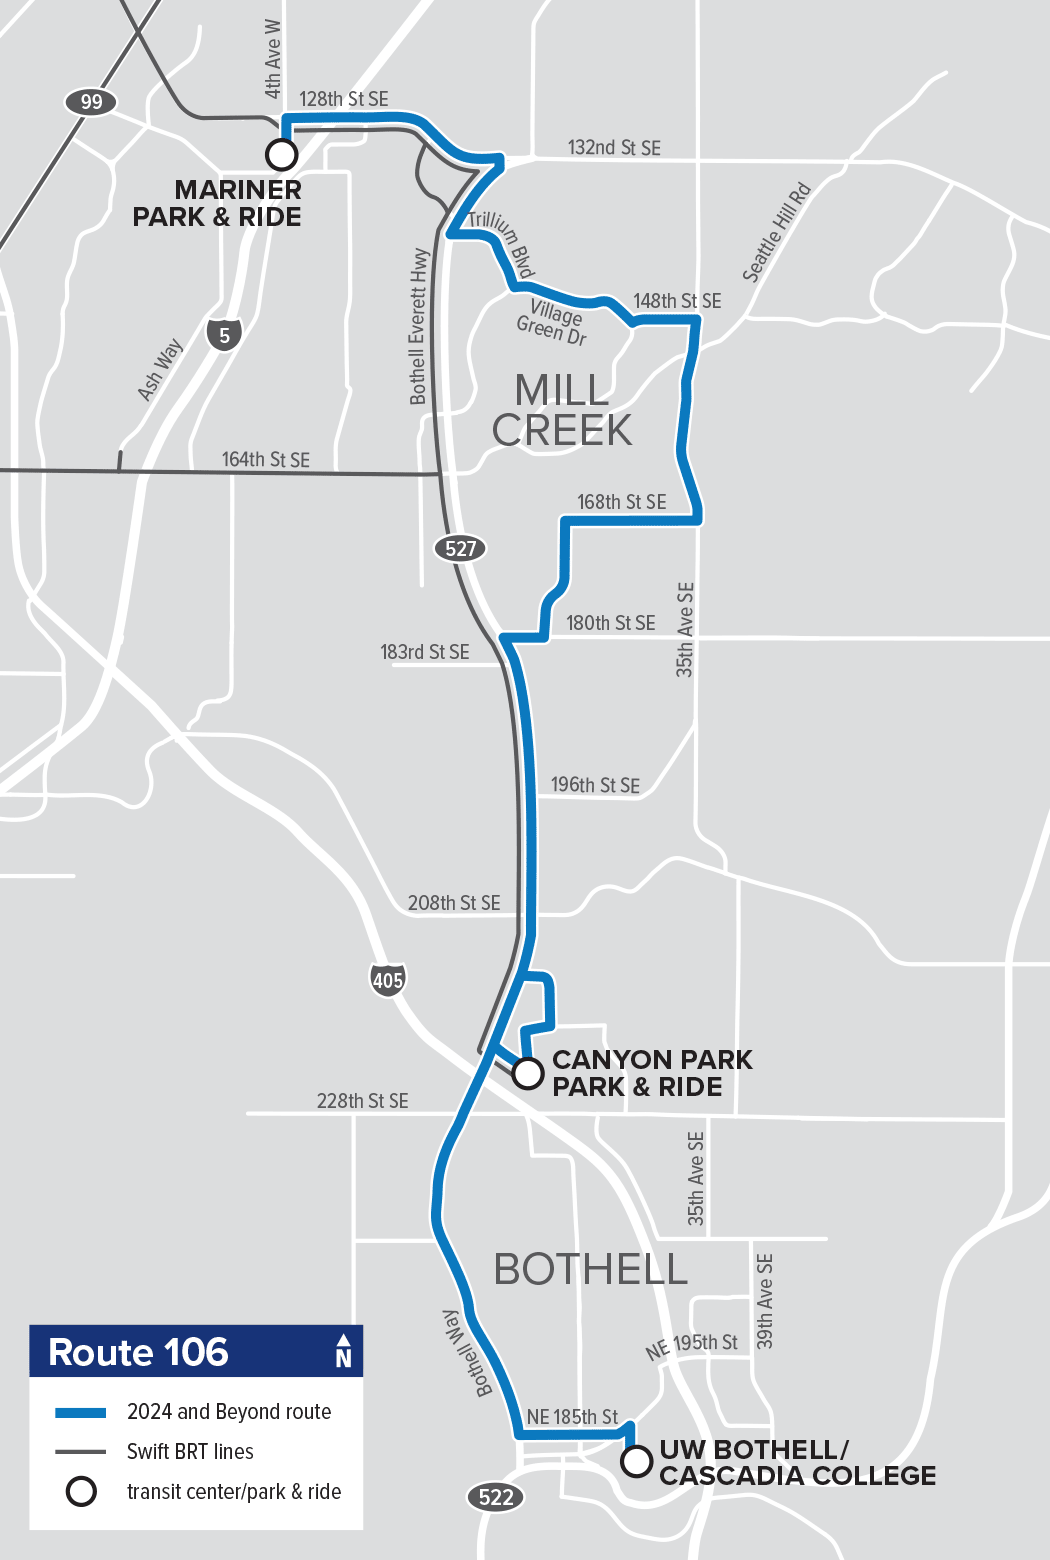 Route 106: Mariner - Bothell (increased frequency)